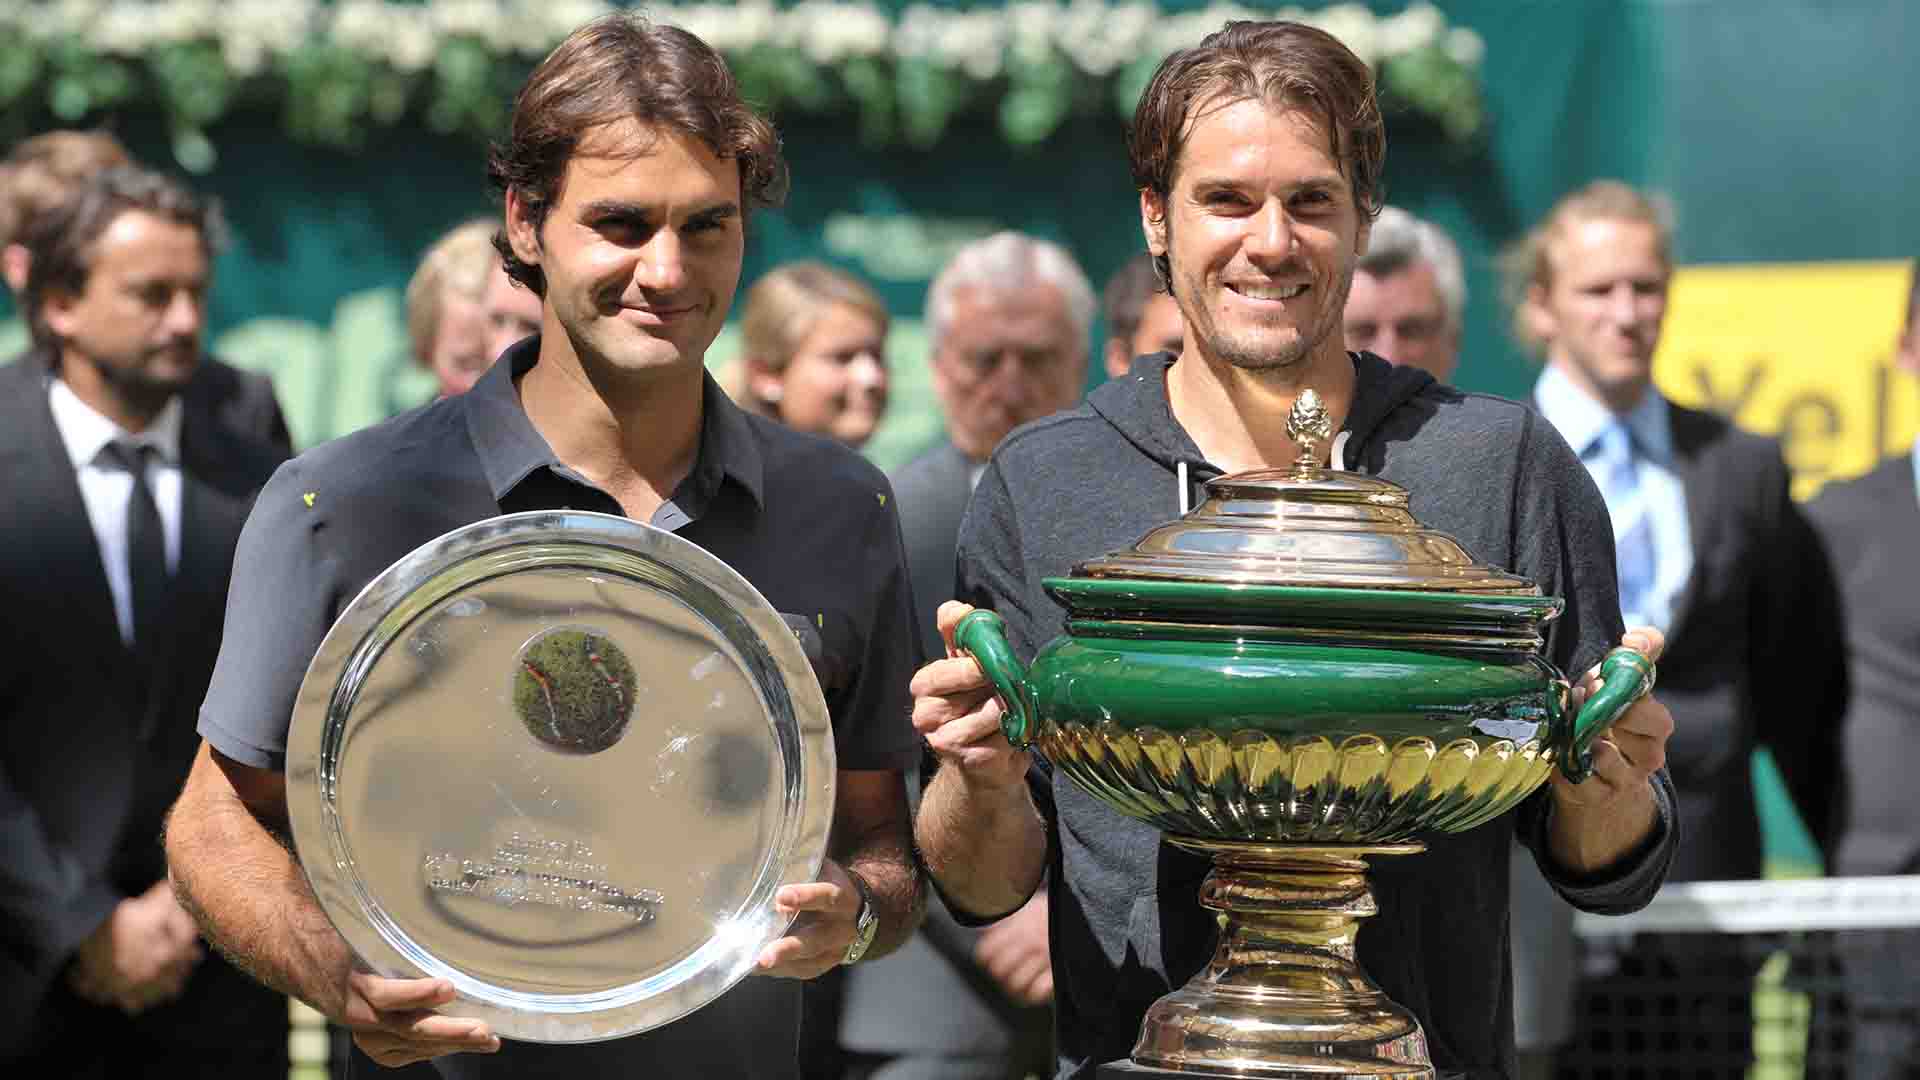 Roger Federer and Tommy Haas contested four ATP Head2Head clashes at the NOVENTI OPEN in Halle.